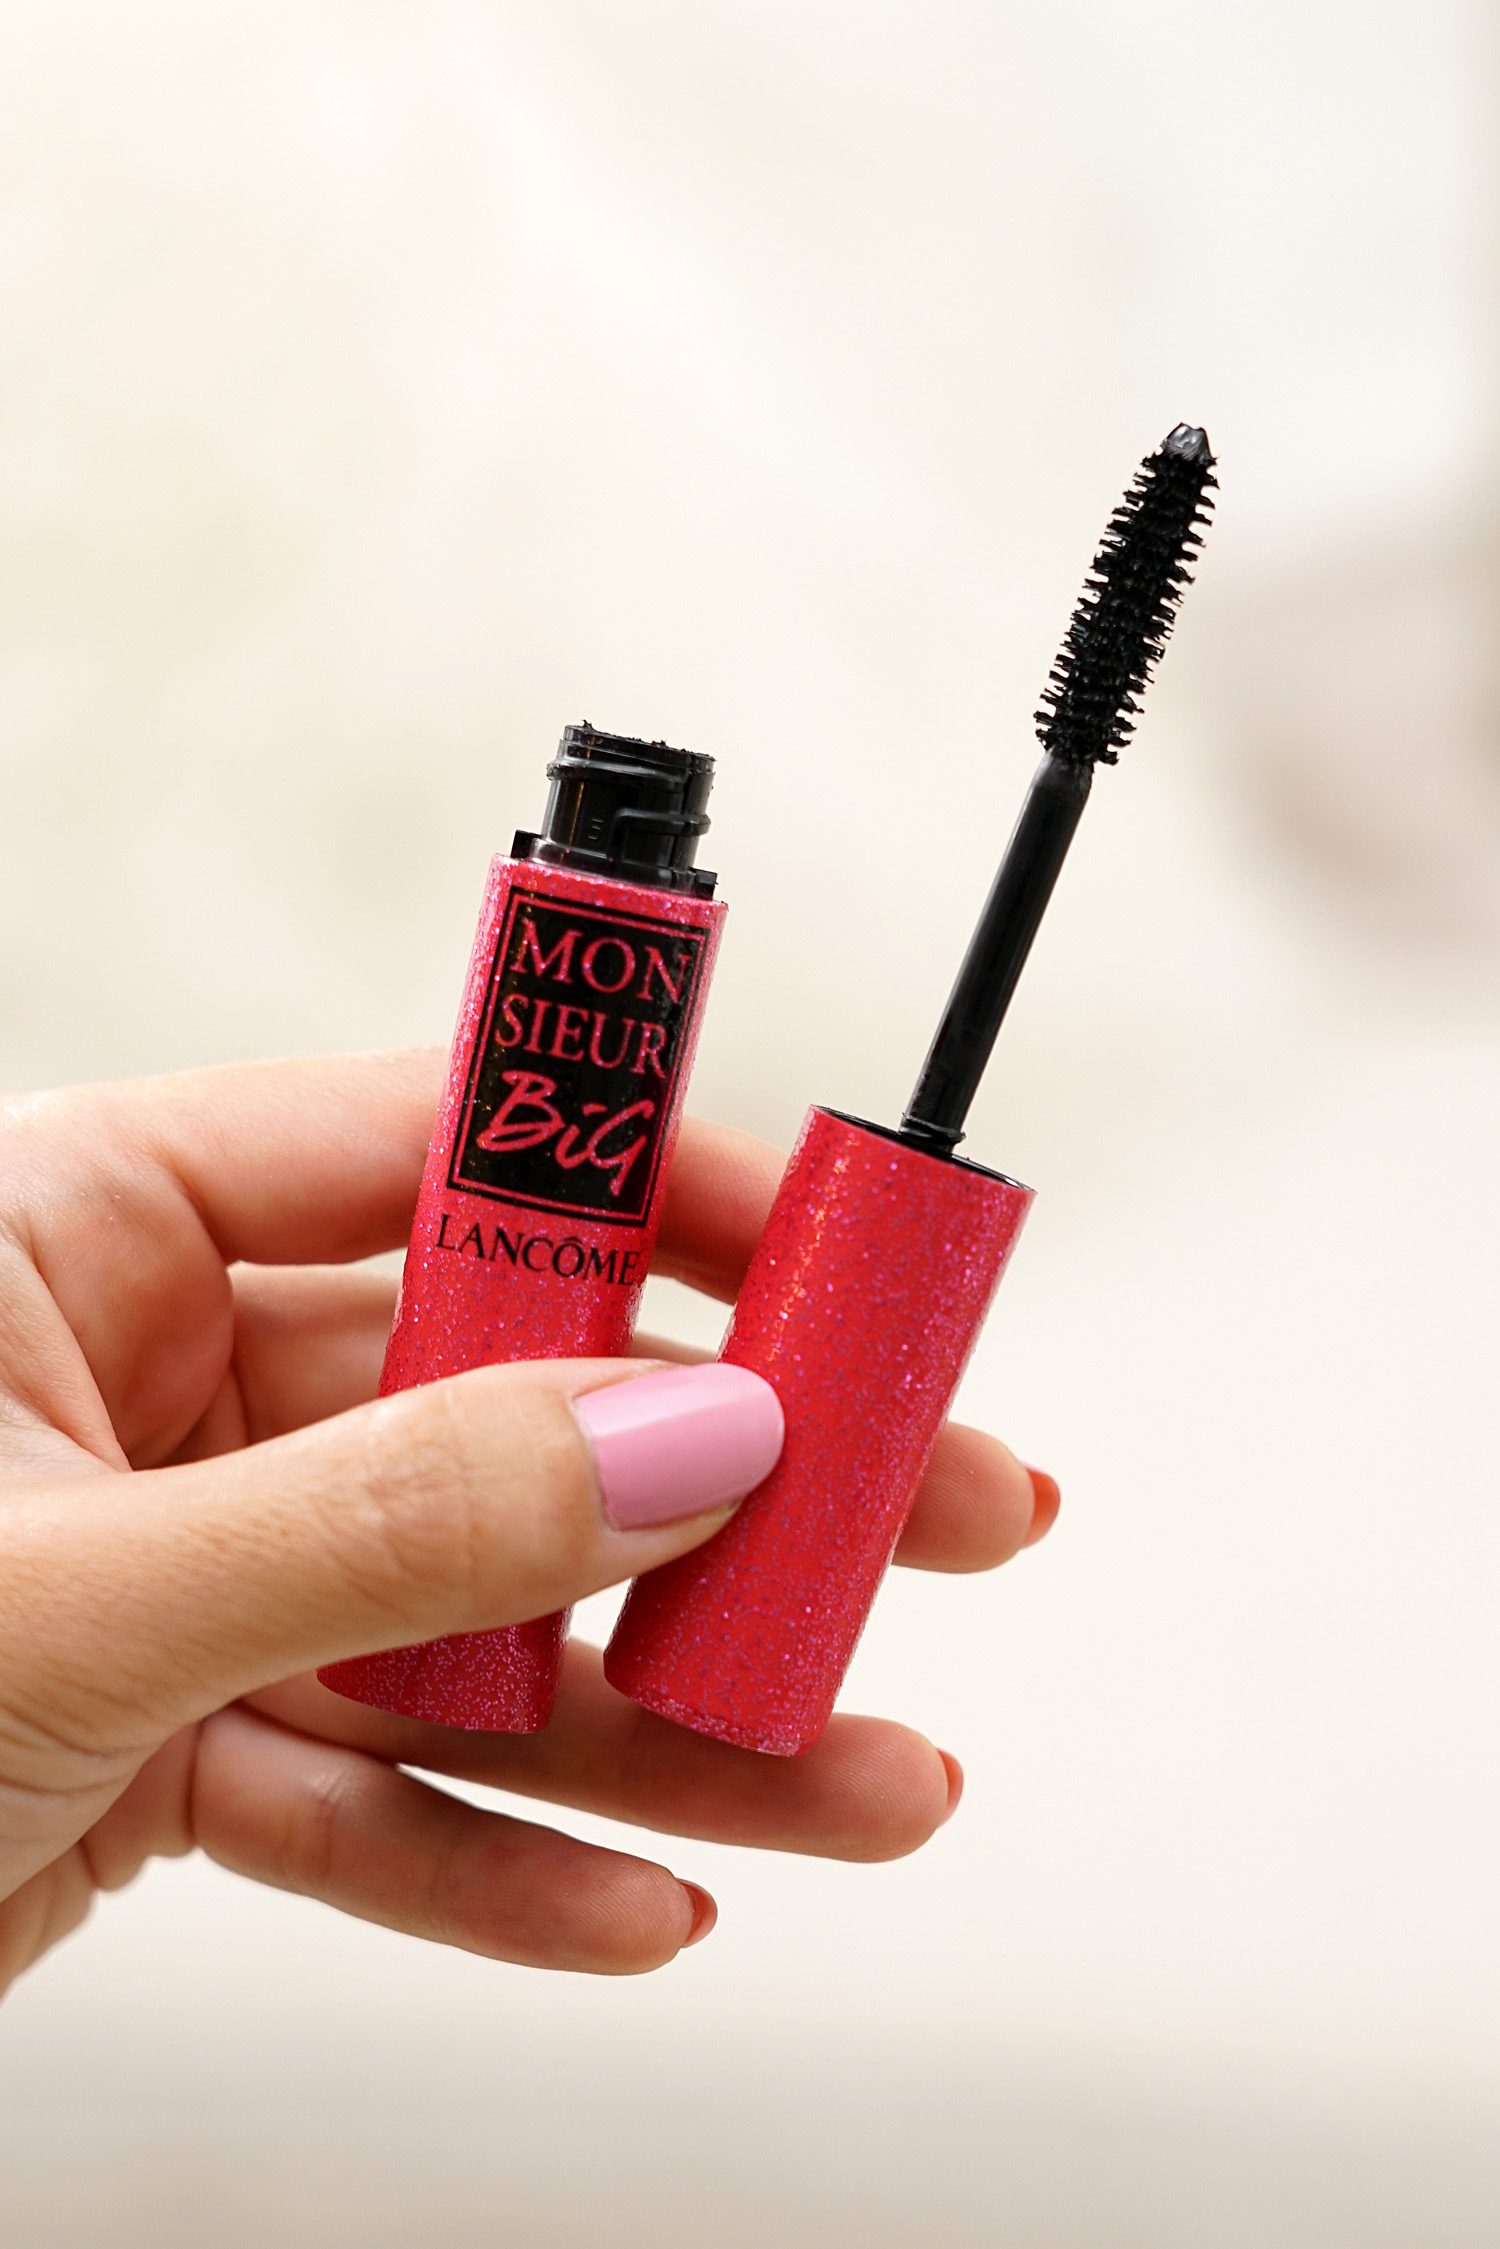 Lancome Monsieur Big Mascara Review The Beauty Look Book